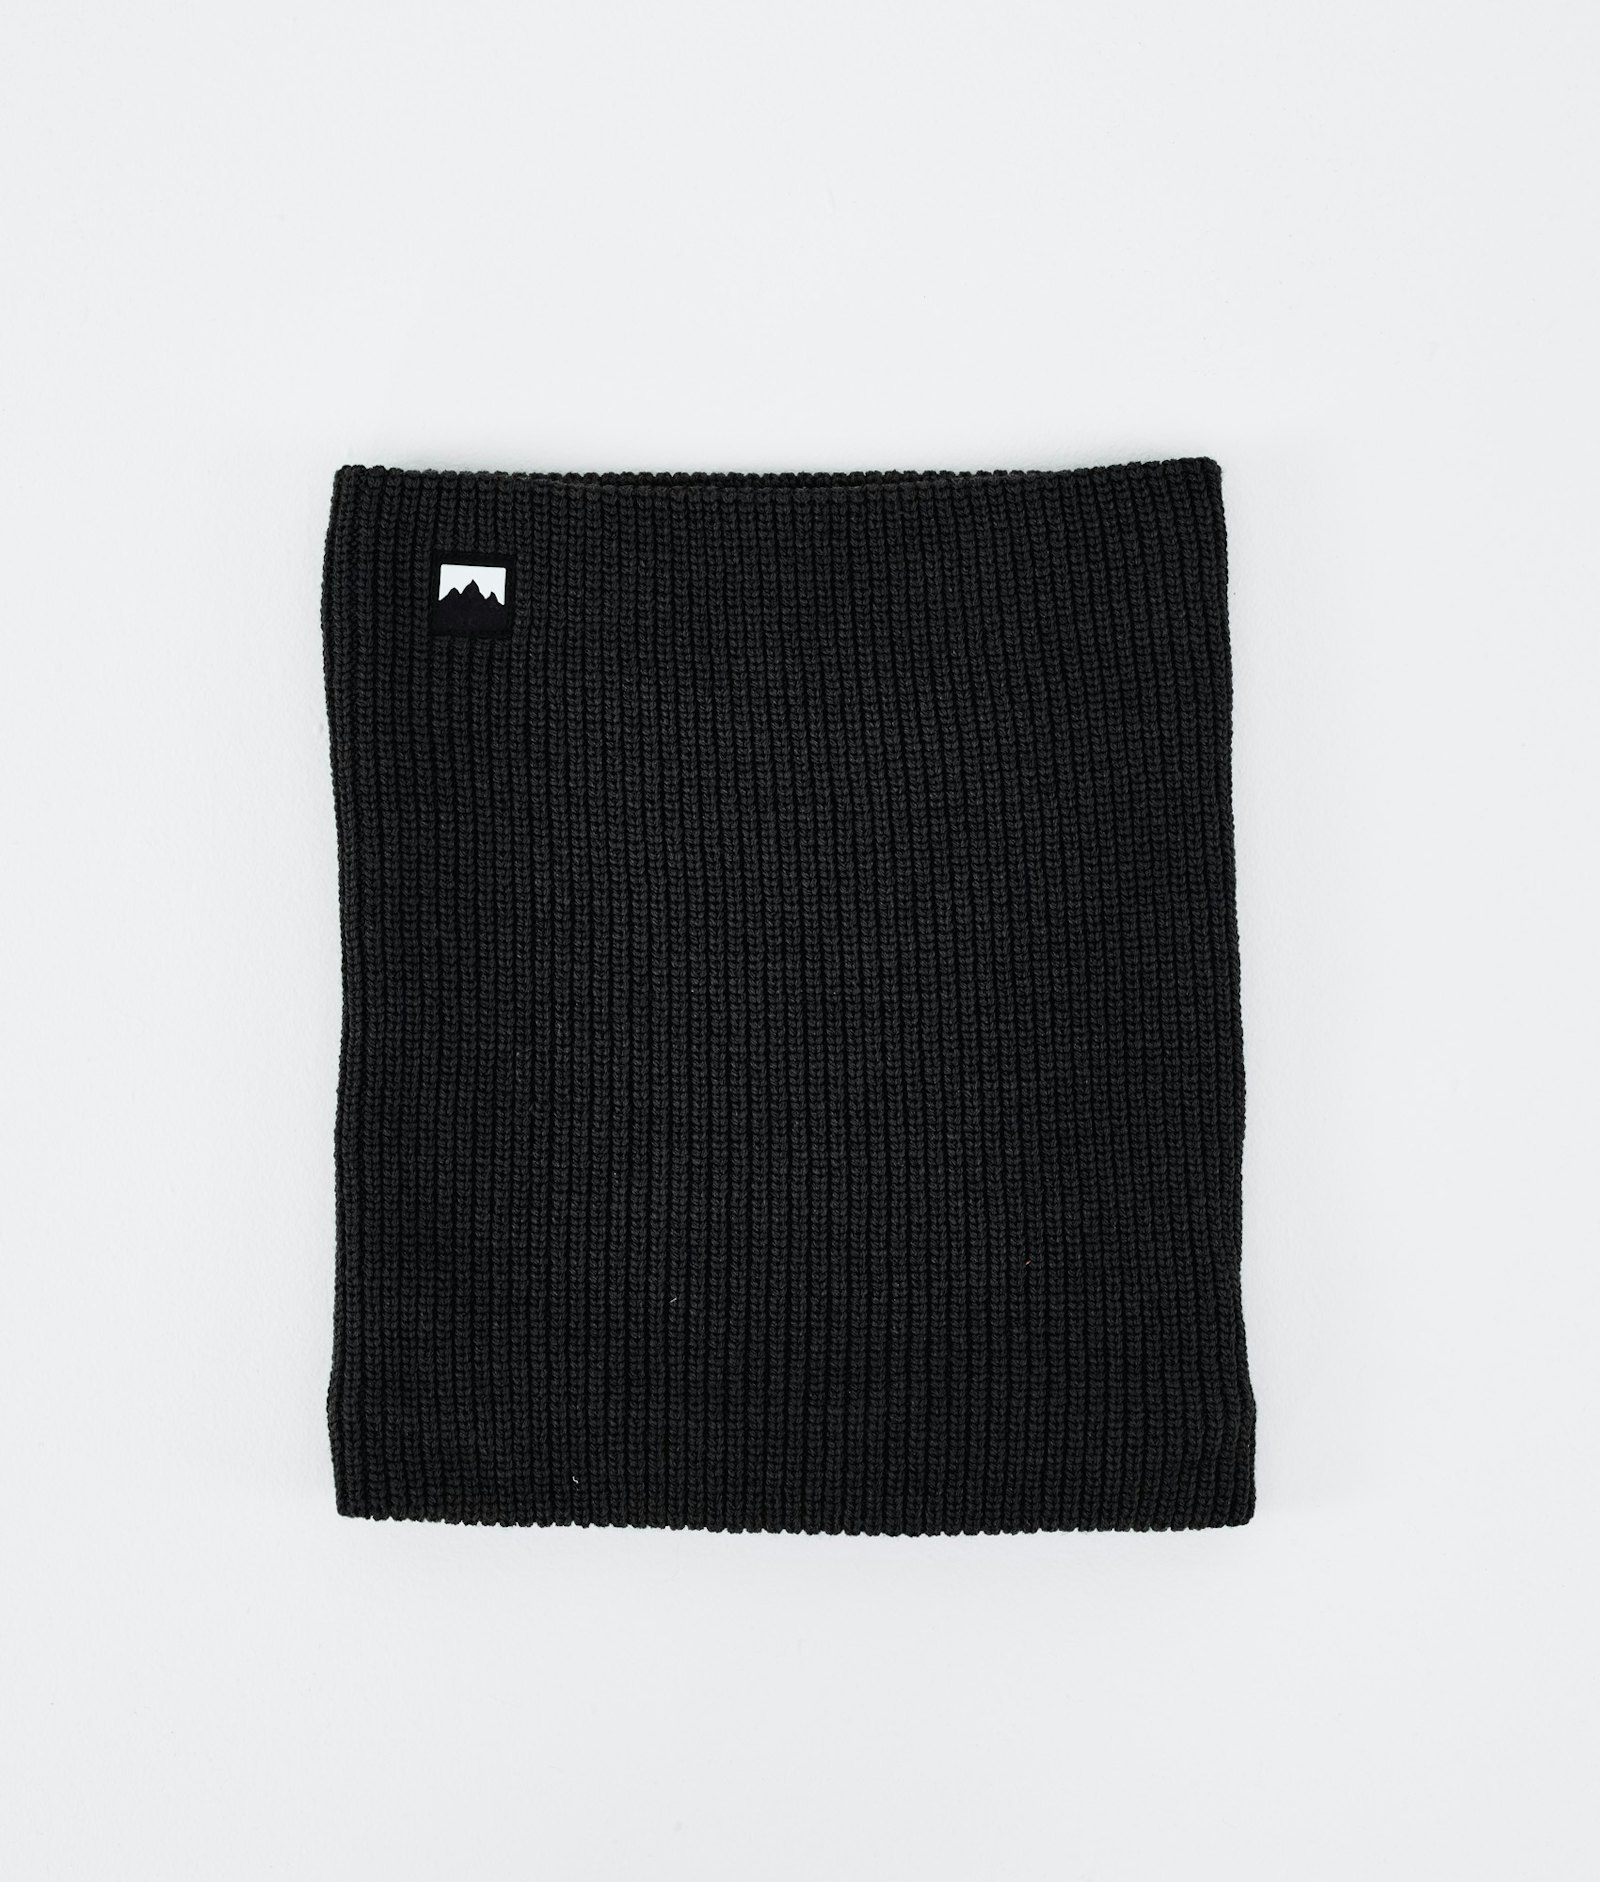 Classic Knitted Facemask Black, Image 1 of 3